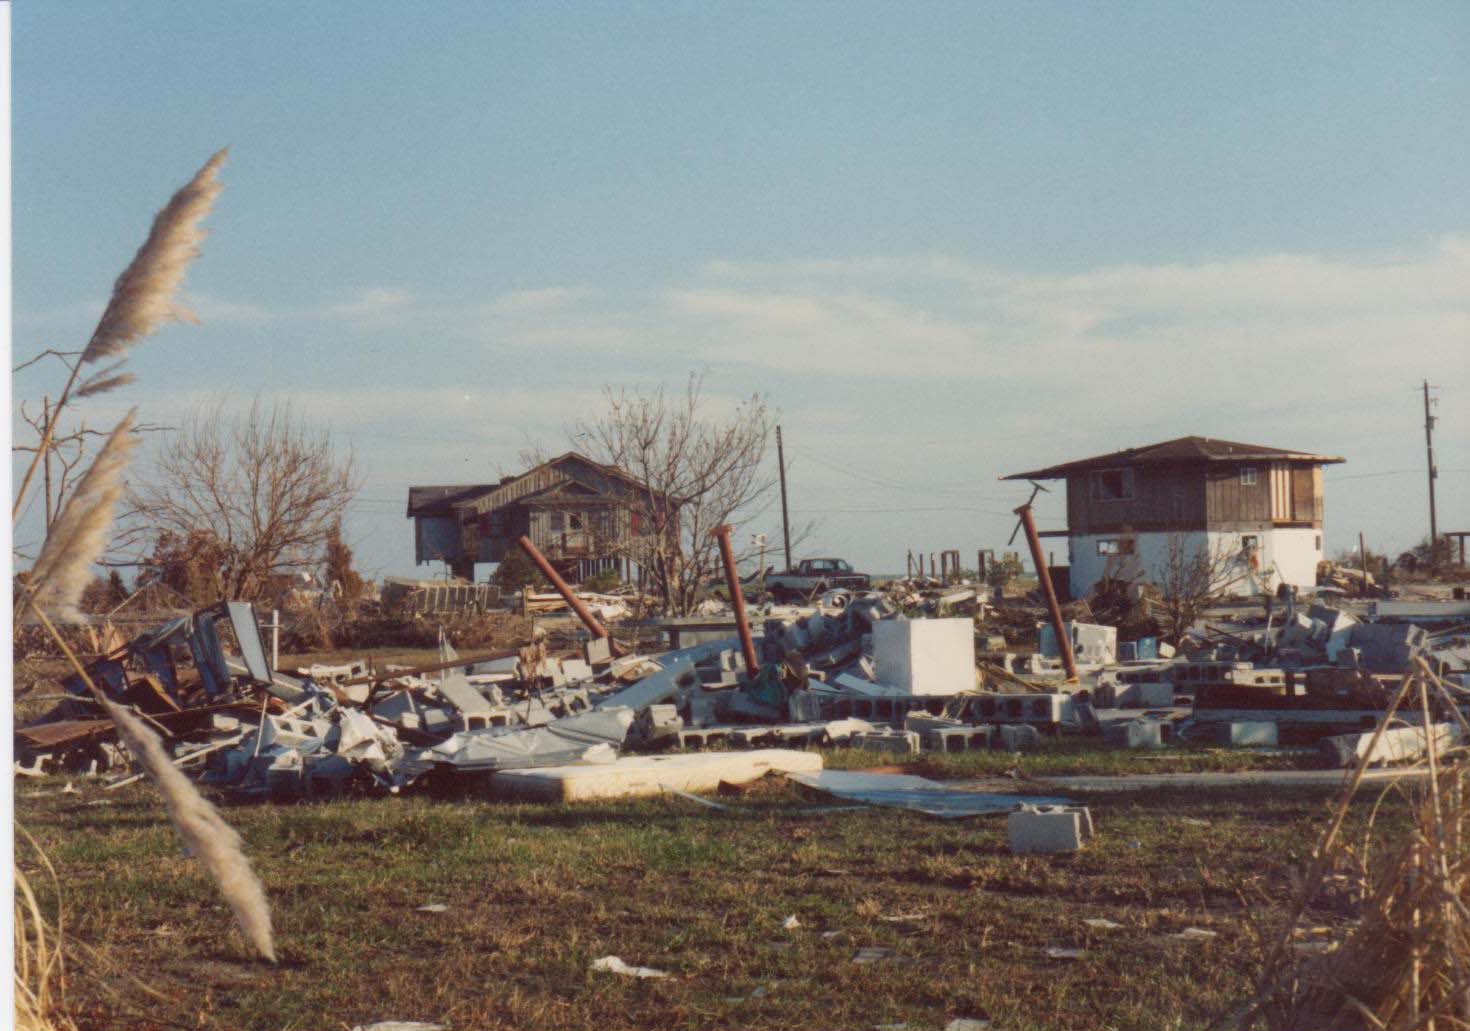 The remains of the houses next door after Hurricane Hugo